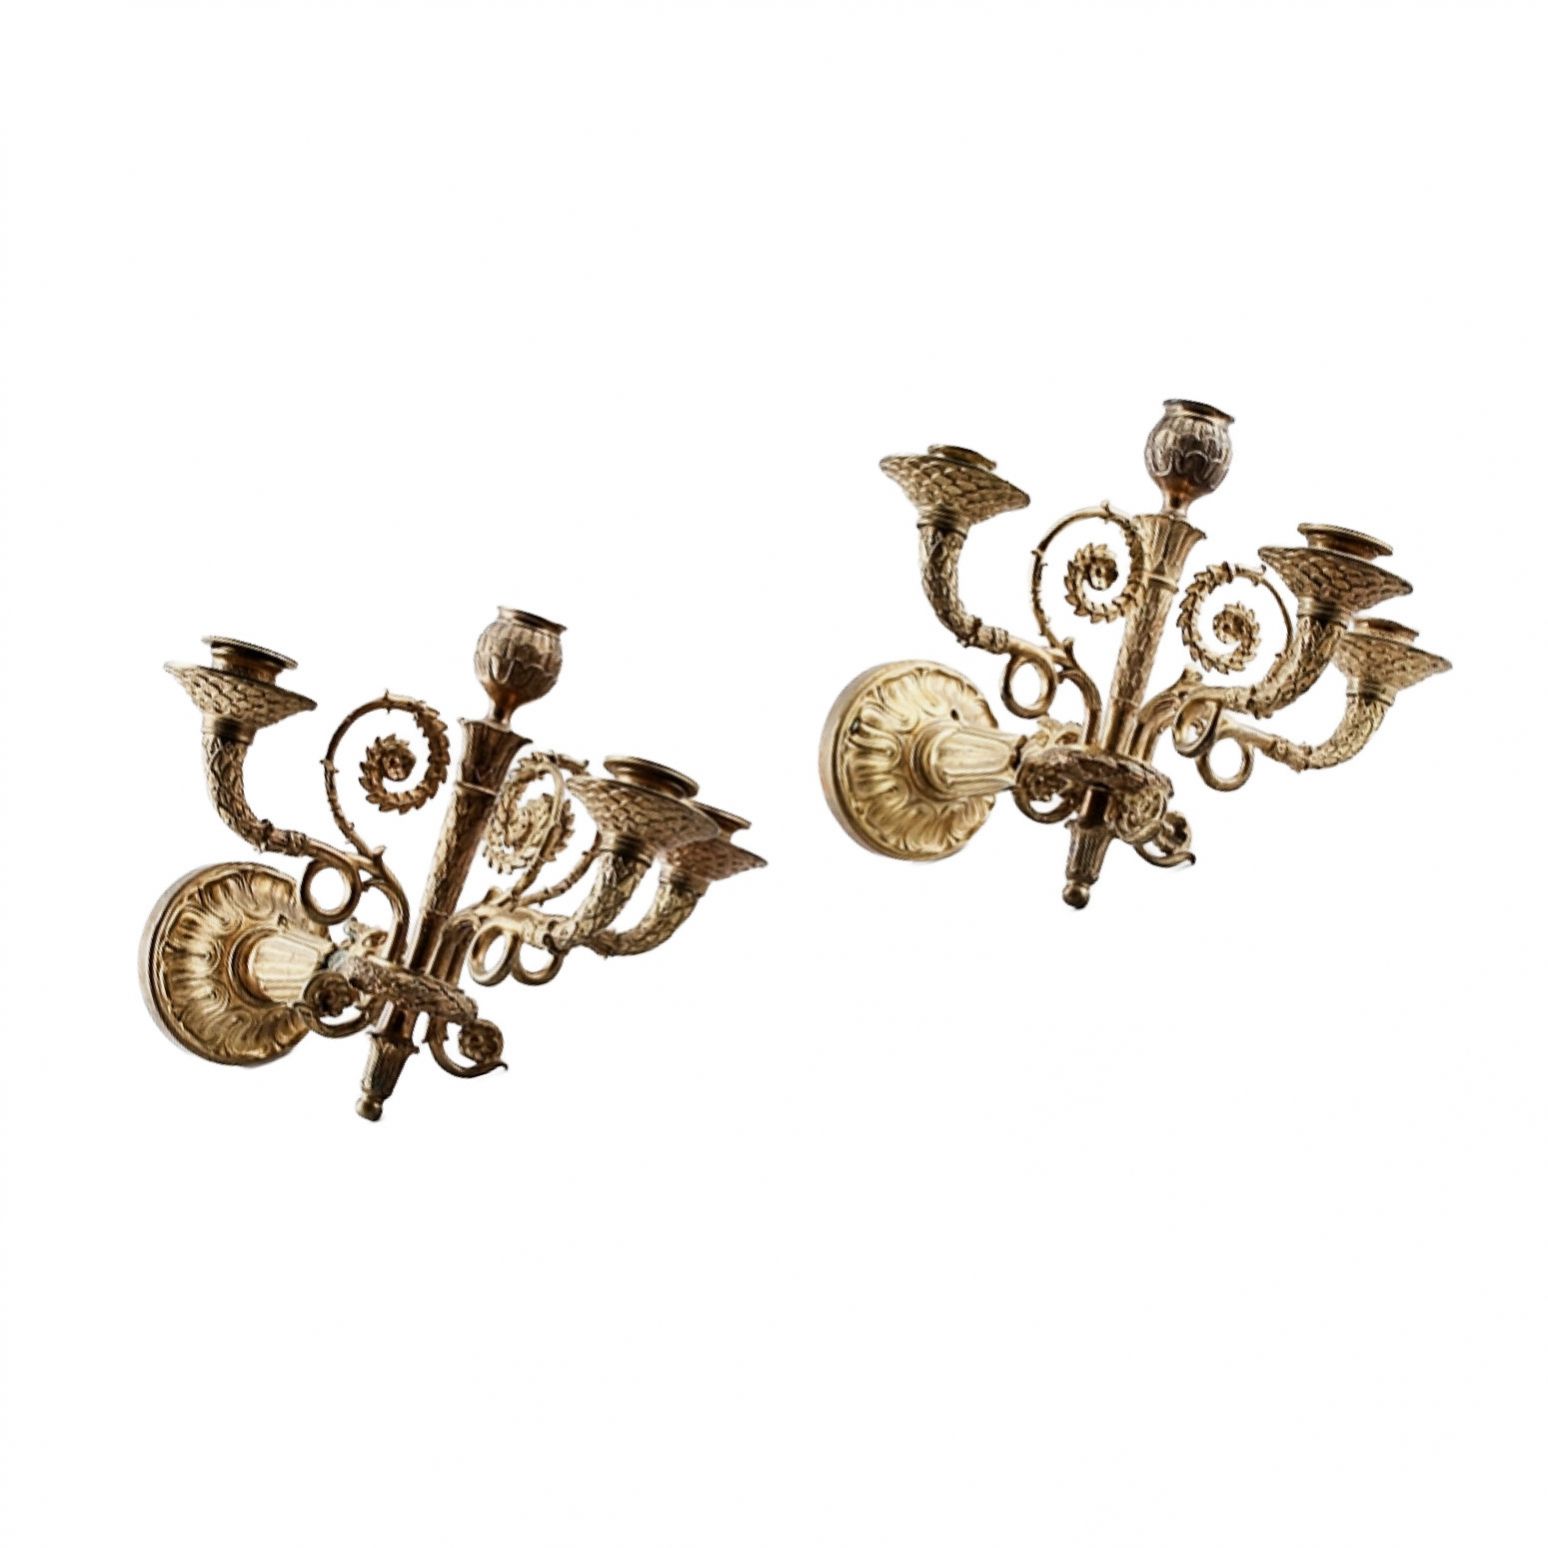 Pair-of-bronze-sconces-in-the-Empire-style-